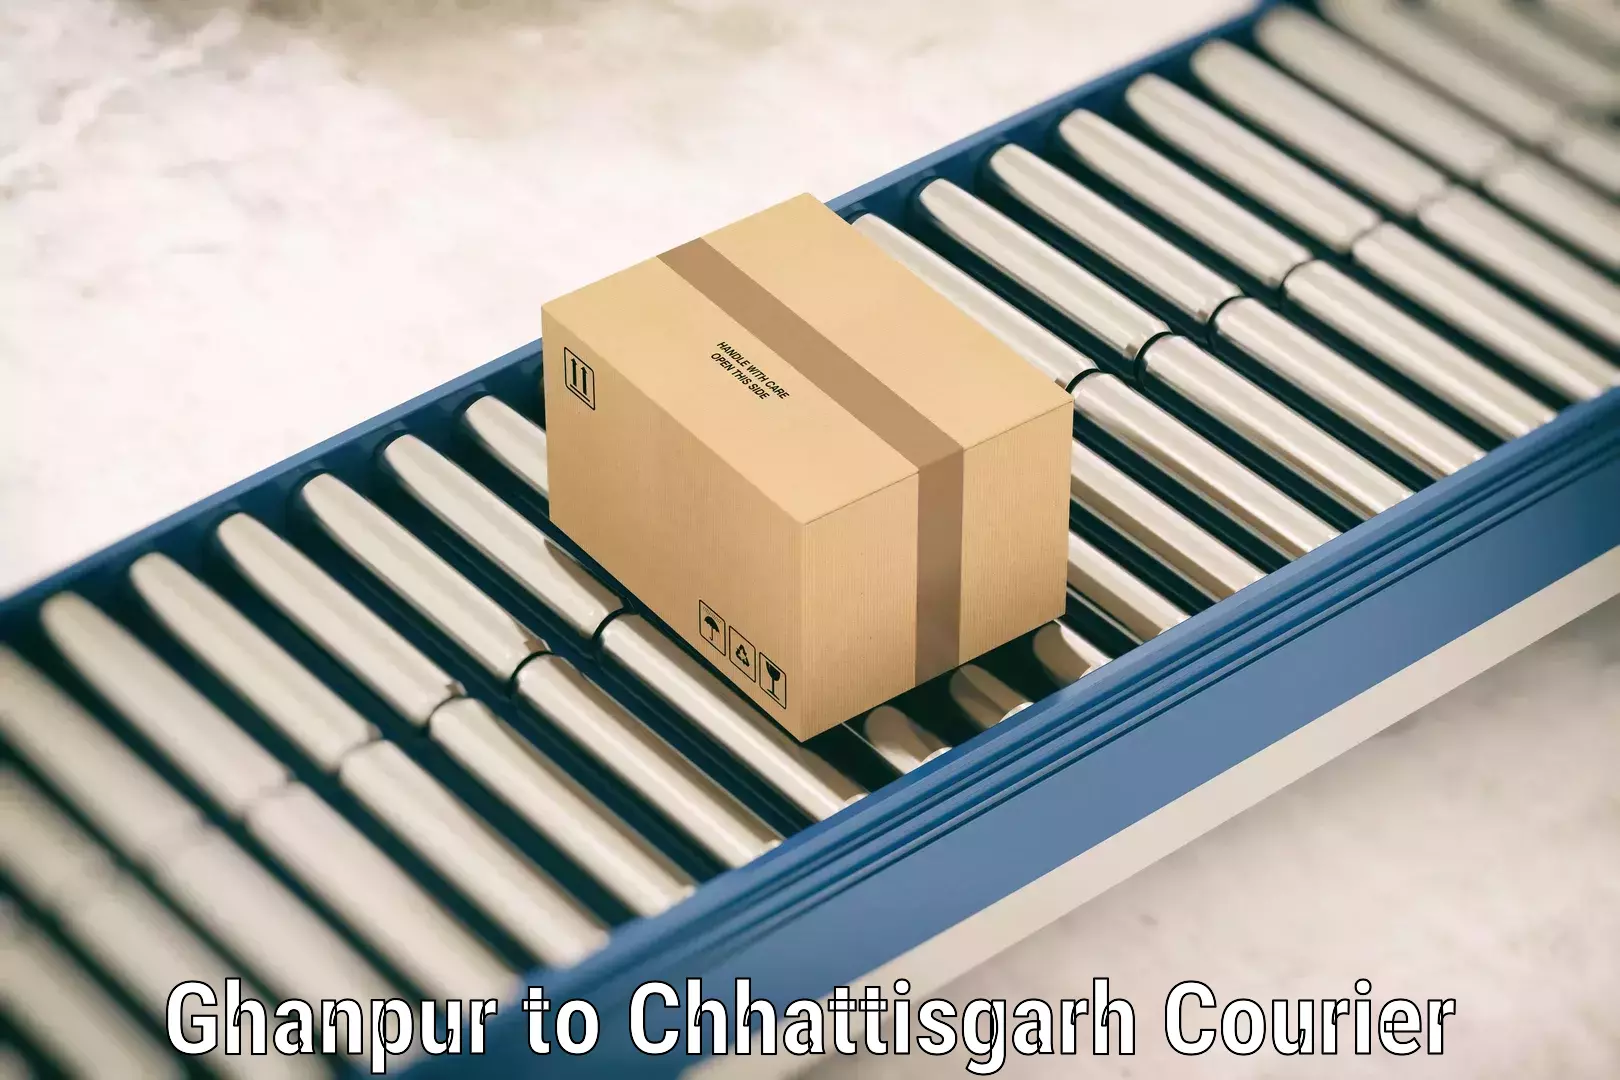 Luggage delivery news Ghanpur to Chhattisgarh